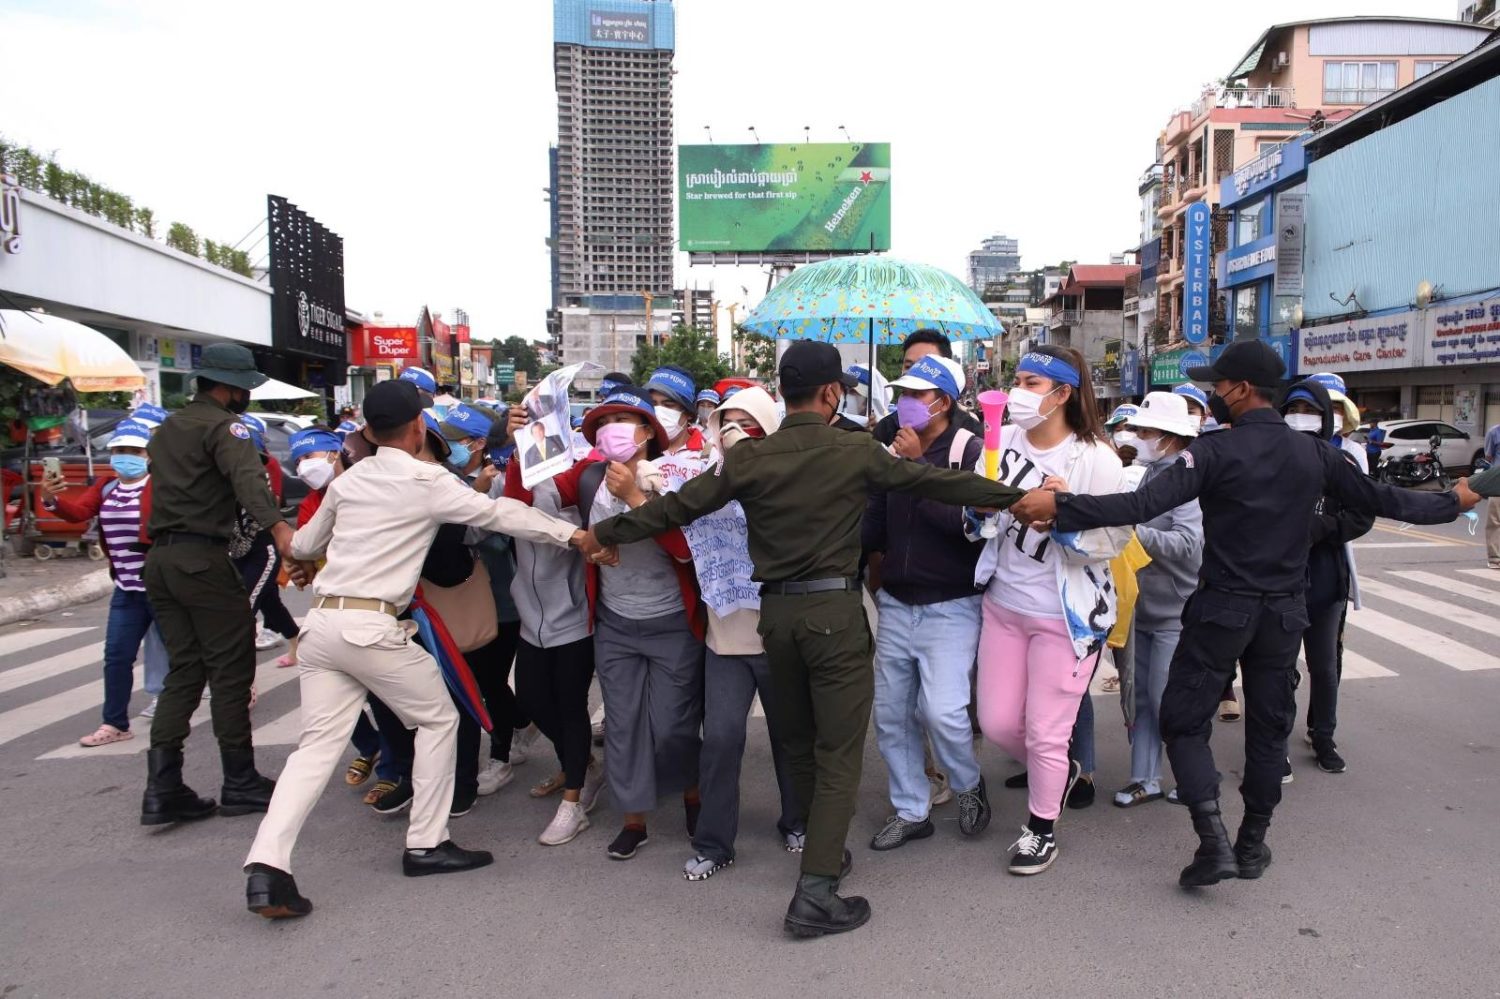 Security officers surround NagaWorld protesters, who breached a road barrier, in Phnom Penh on July 12, 2022. (Hean Rangsey/VOD)